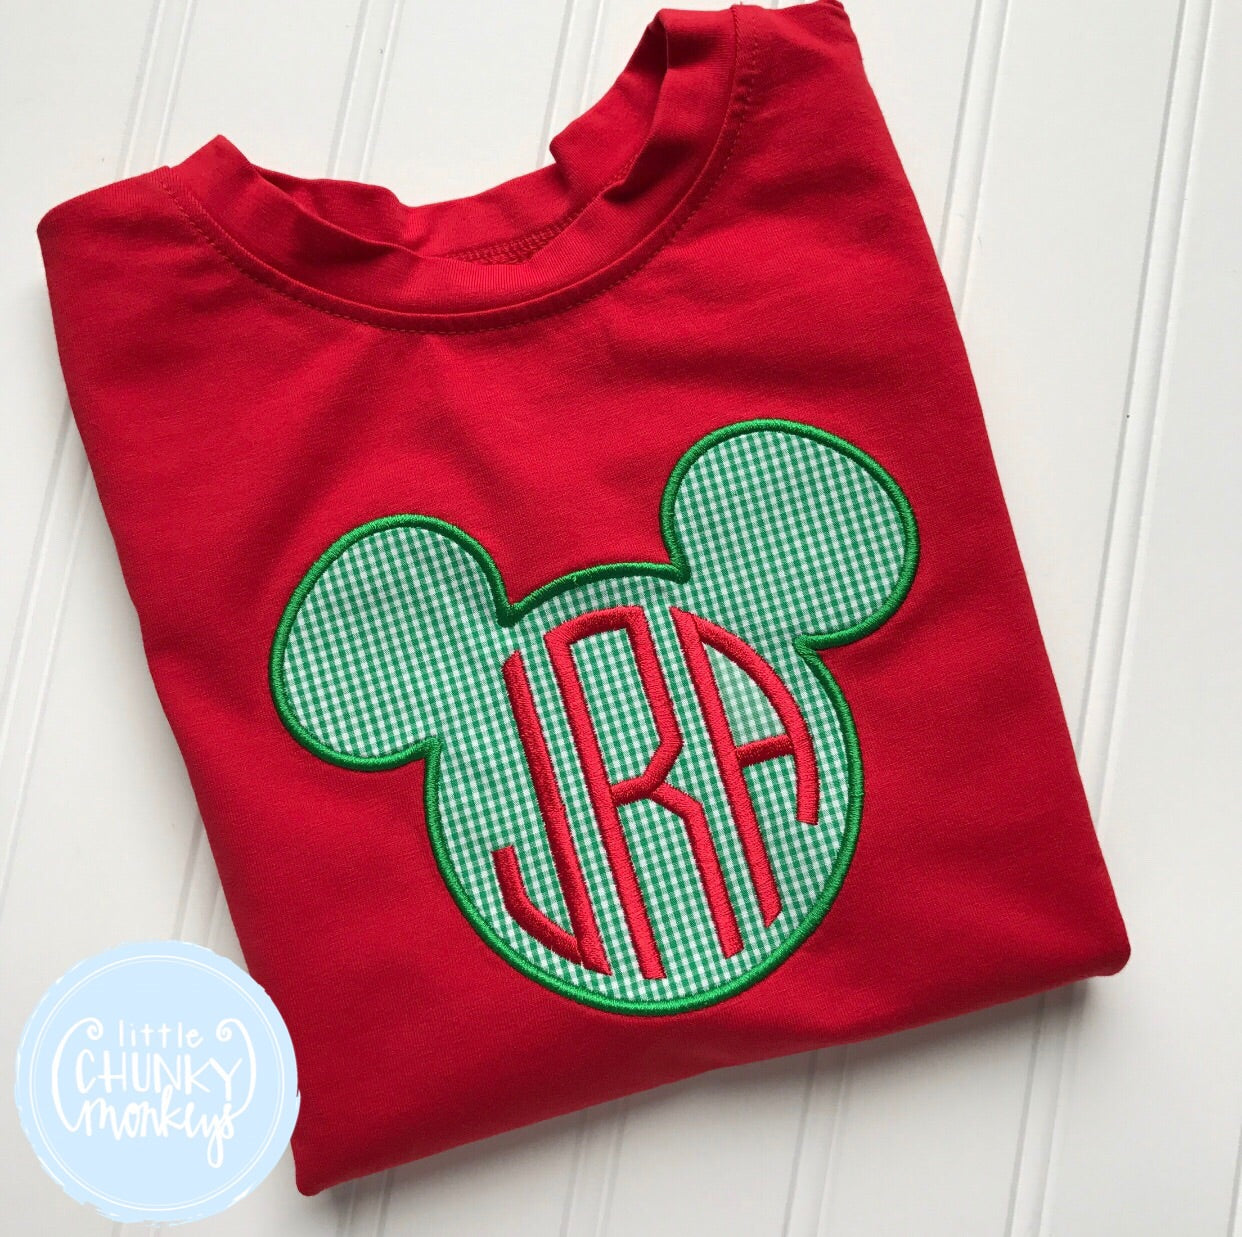 Boy Shirt - Christmas Mouse Applique on Red Shirt